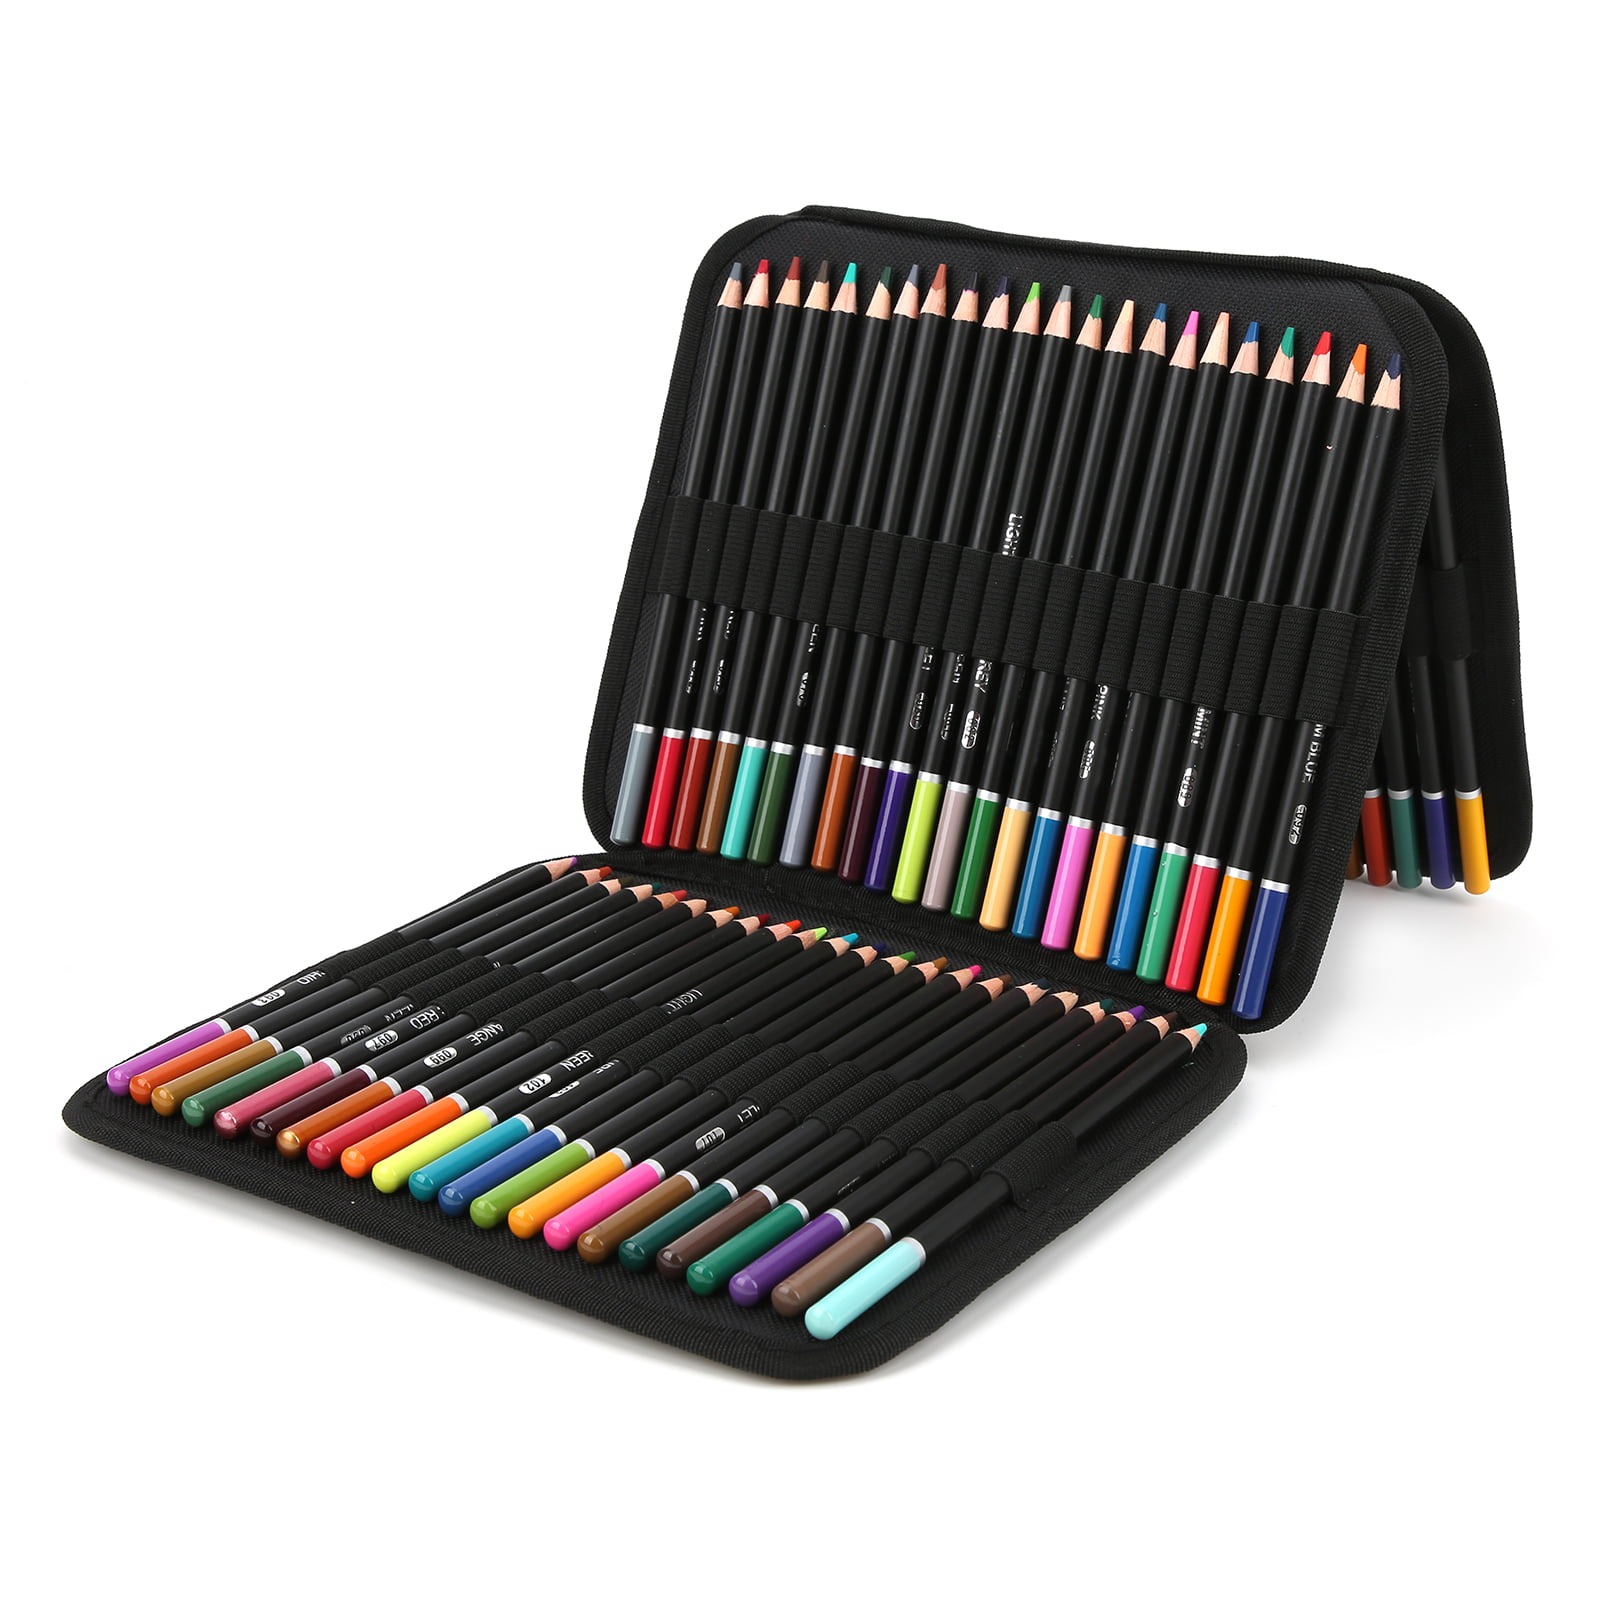 72 Colored Pencils Set,Artist Color Pencil Kit for Adult Kids Teens Coloring  DrawingSoft Core,Oil Based Coloured Pencil,Coloring Book,Sketchpad,Sharpener  in Pencil Case 